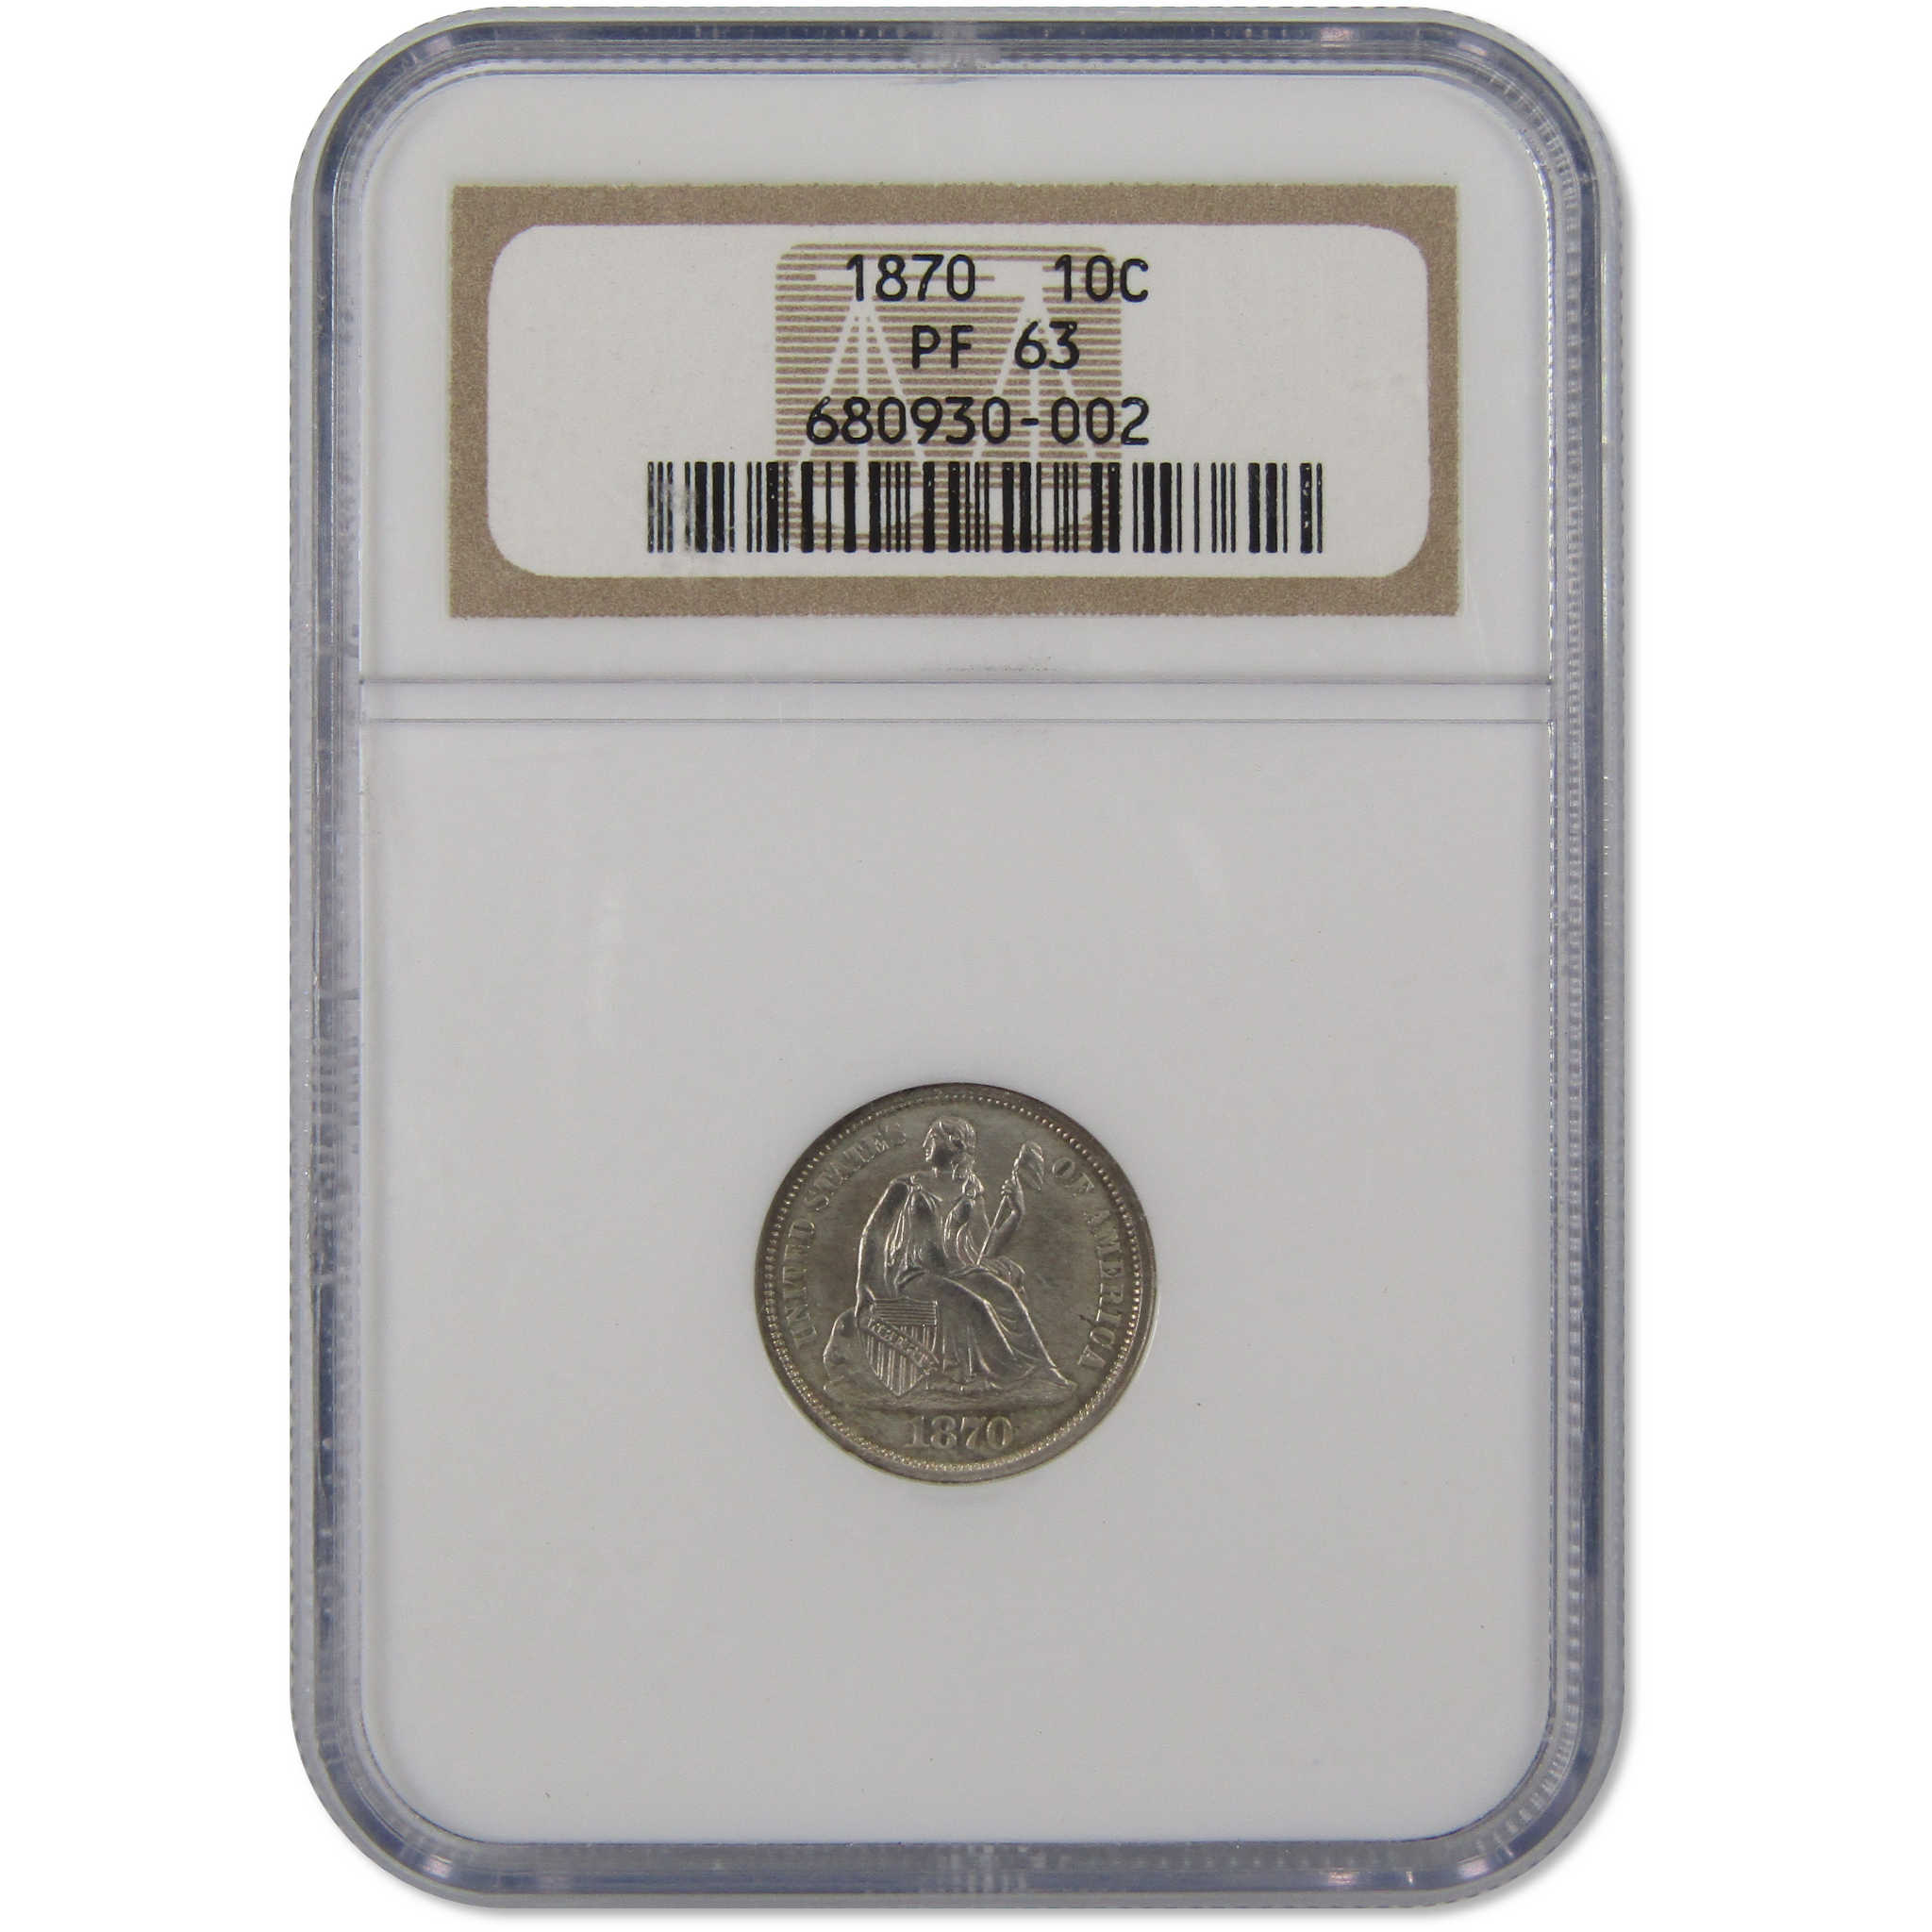 1870 Seated Liberty Dime PF 63 NGC 90% Silver 10c Proof Coin SKU:I9751